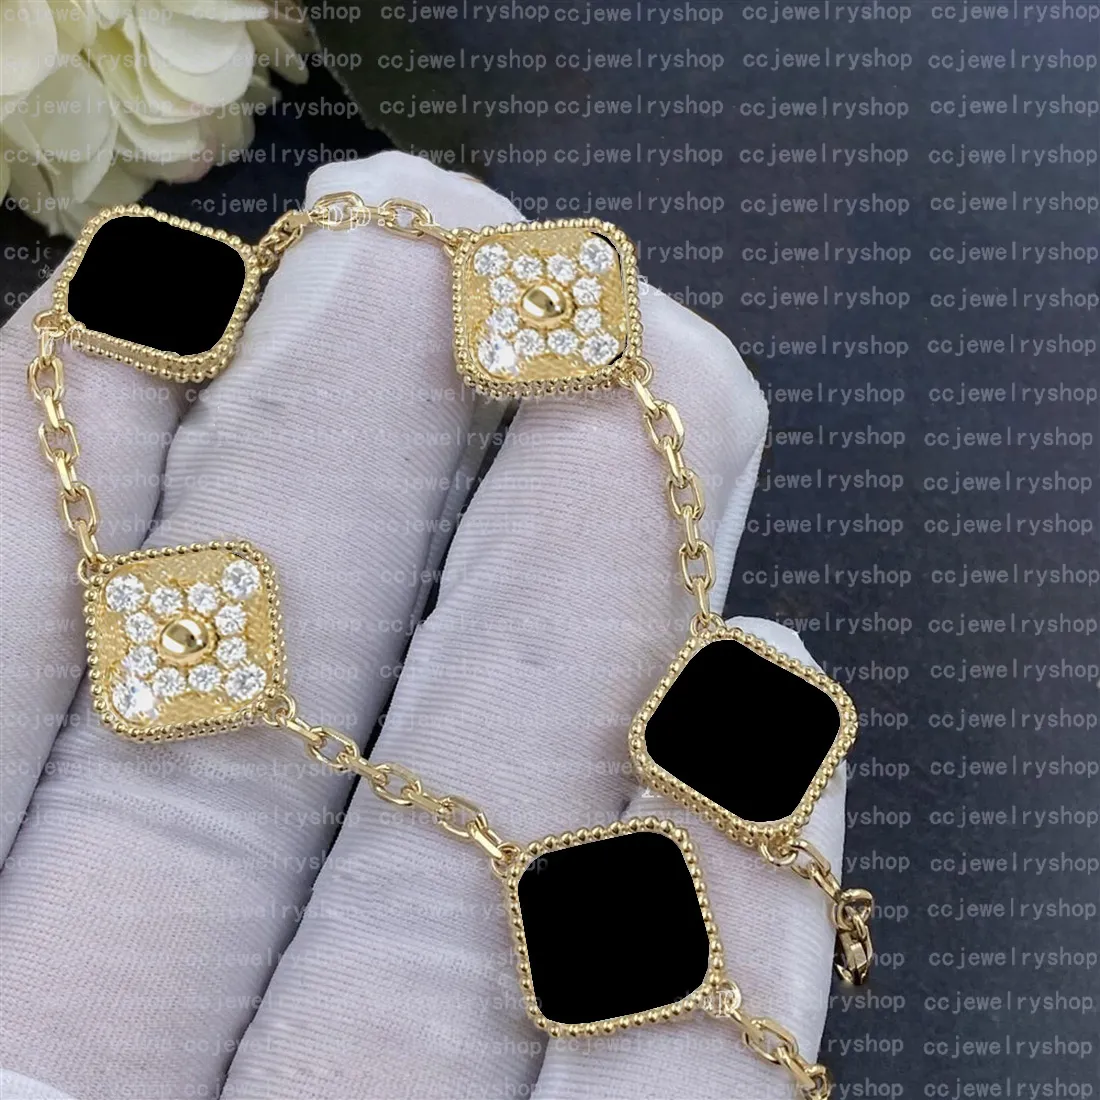 5 Colors Fashion Classic 4/Four Leaf Clover Charm Bracelets diamond Bangle Chain 18K Gold Agate Shell Mother-of-Pearl for Women&Girls Wedding Mother's Day Jewelry AA